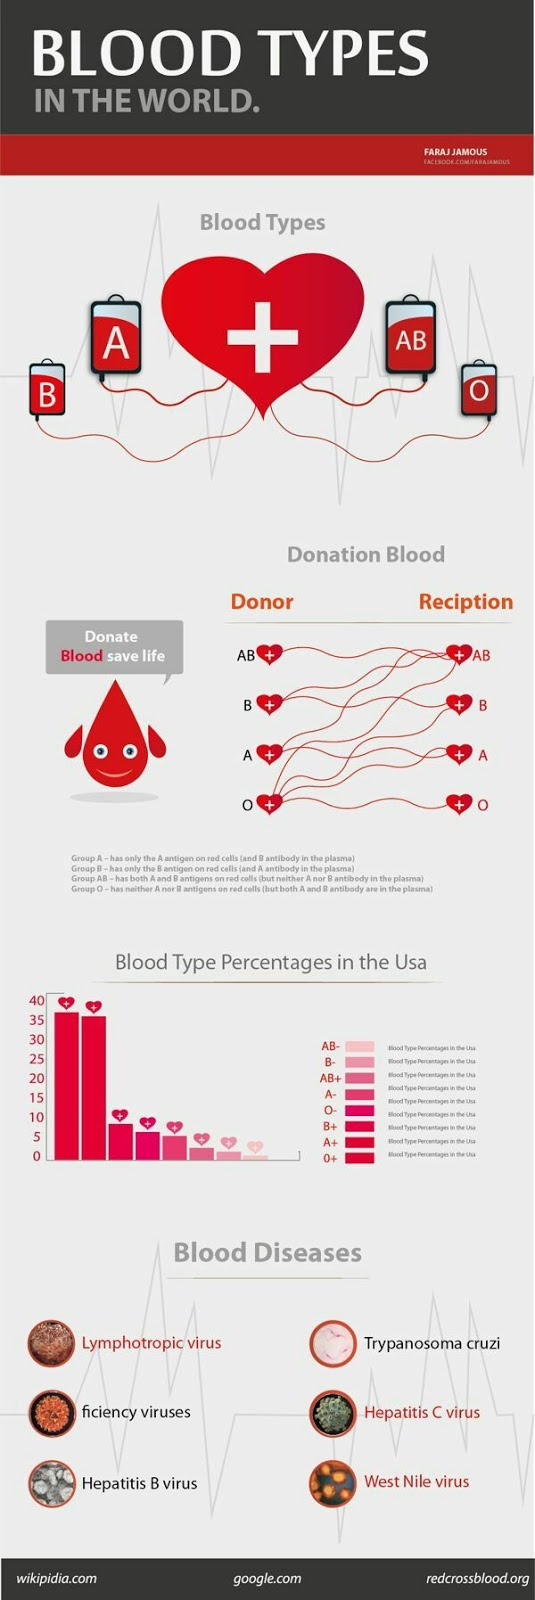 A Must See! Checkout The Blood Types And Their Compatible Donors